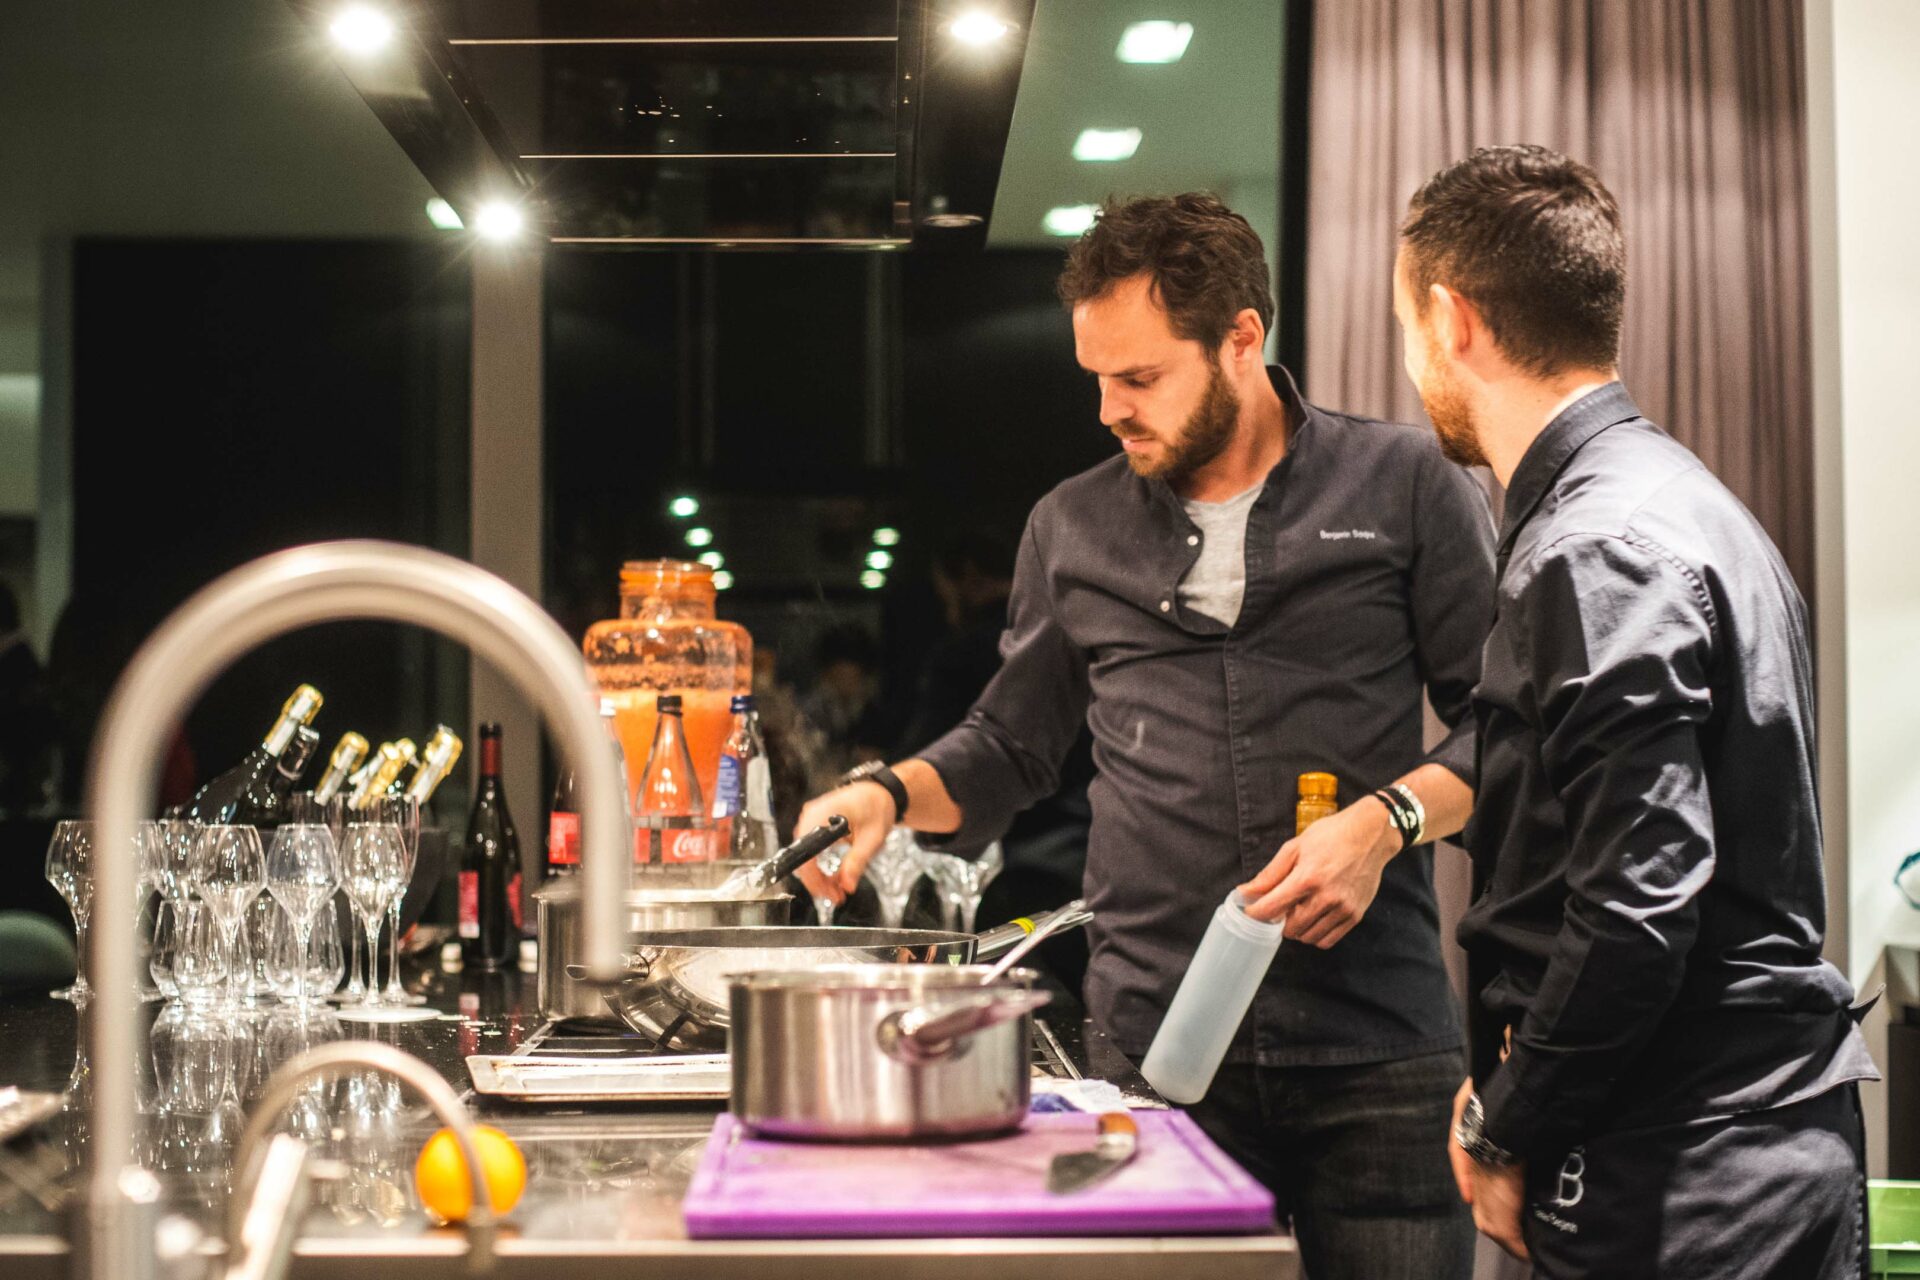 Dinner preparations by chef Benjamin during the "How to invest in Italy" event hosted by Italy Sotheby's International Realty.